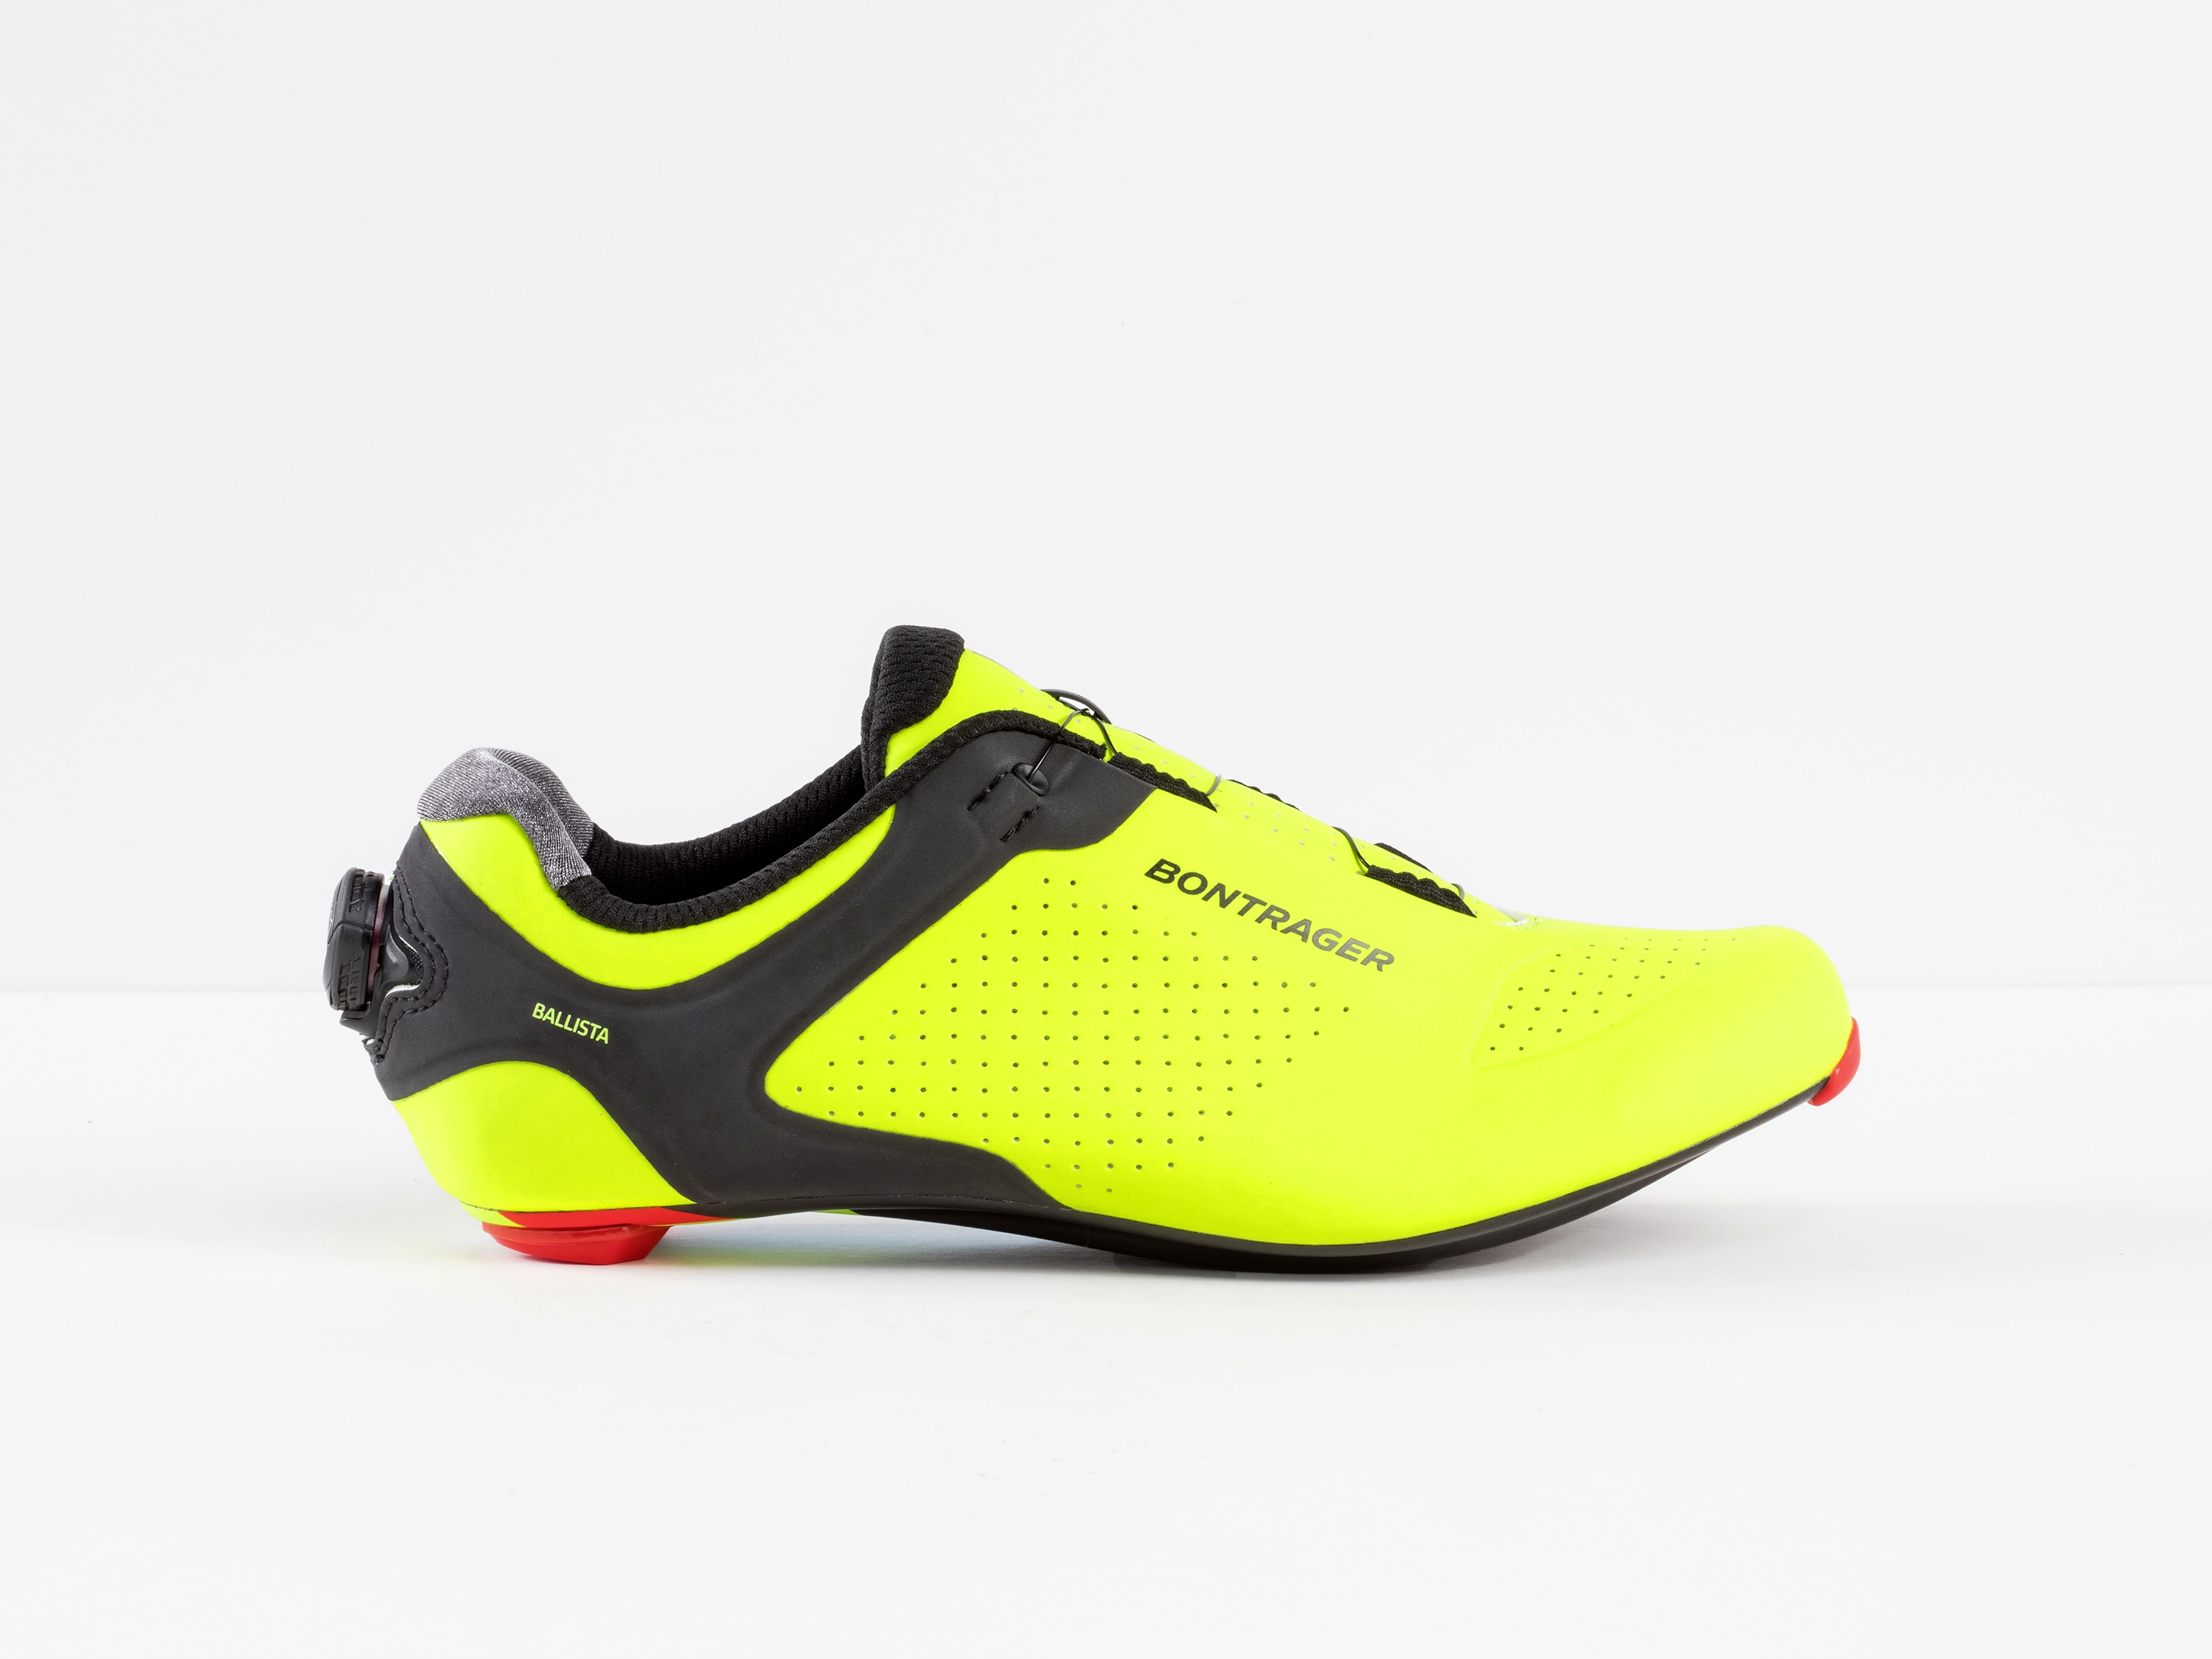 bontrager mens cycling shoes